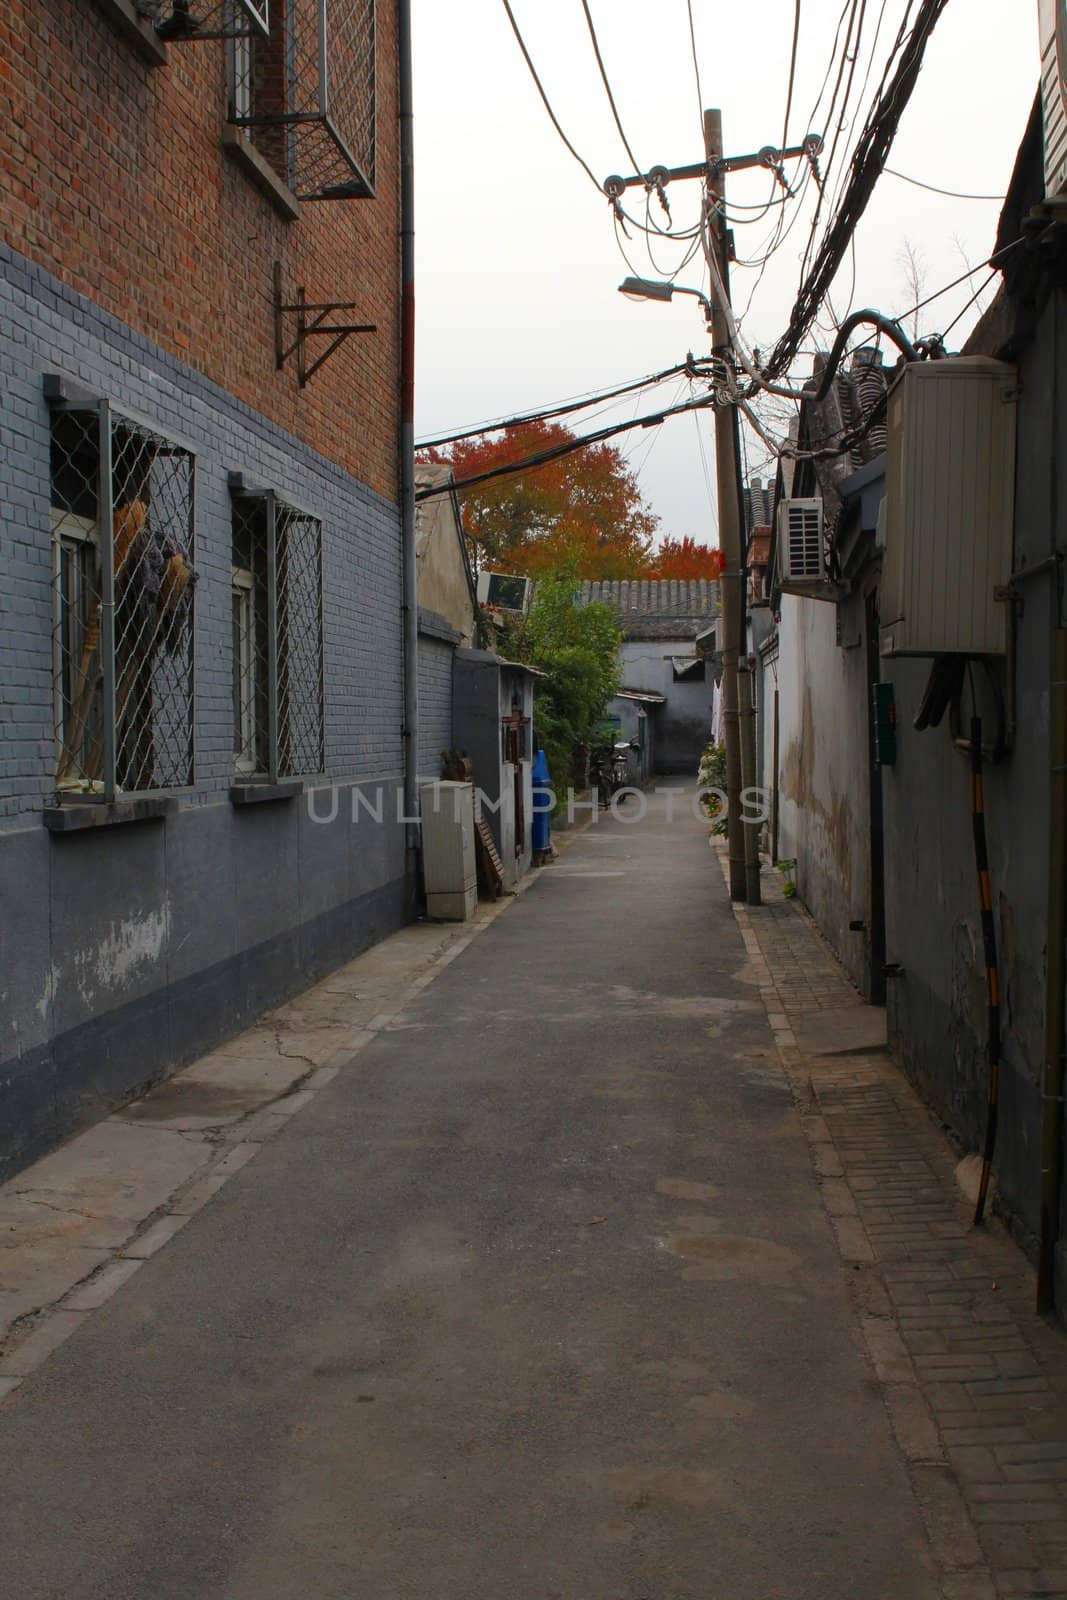 Hutong, a typical narrow street in Beijing, China
